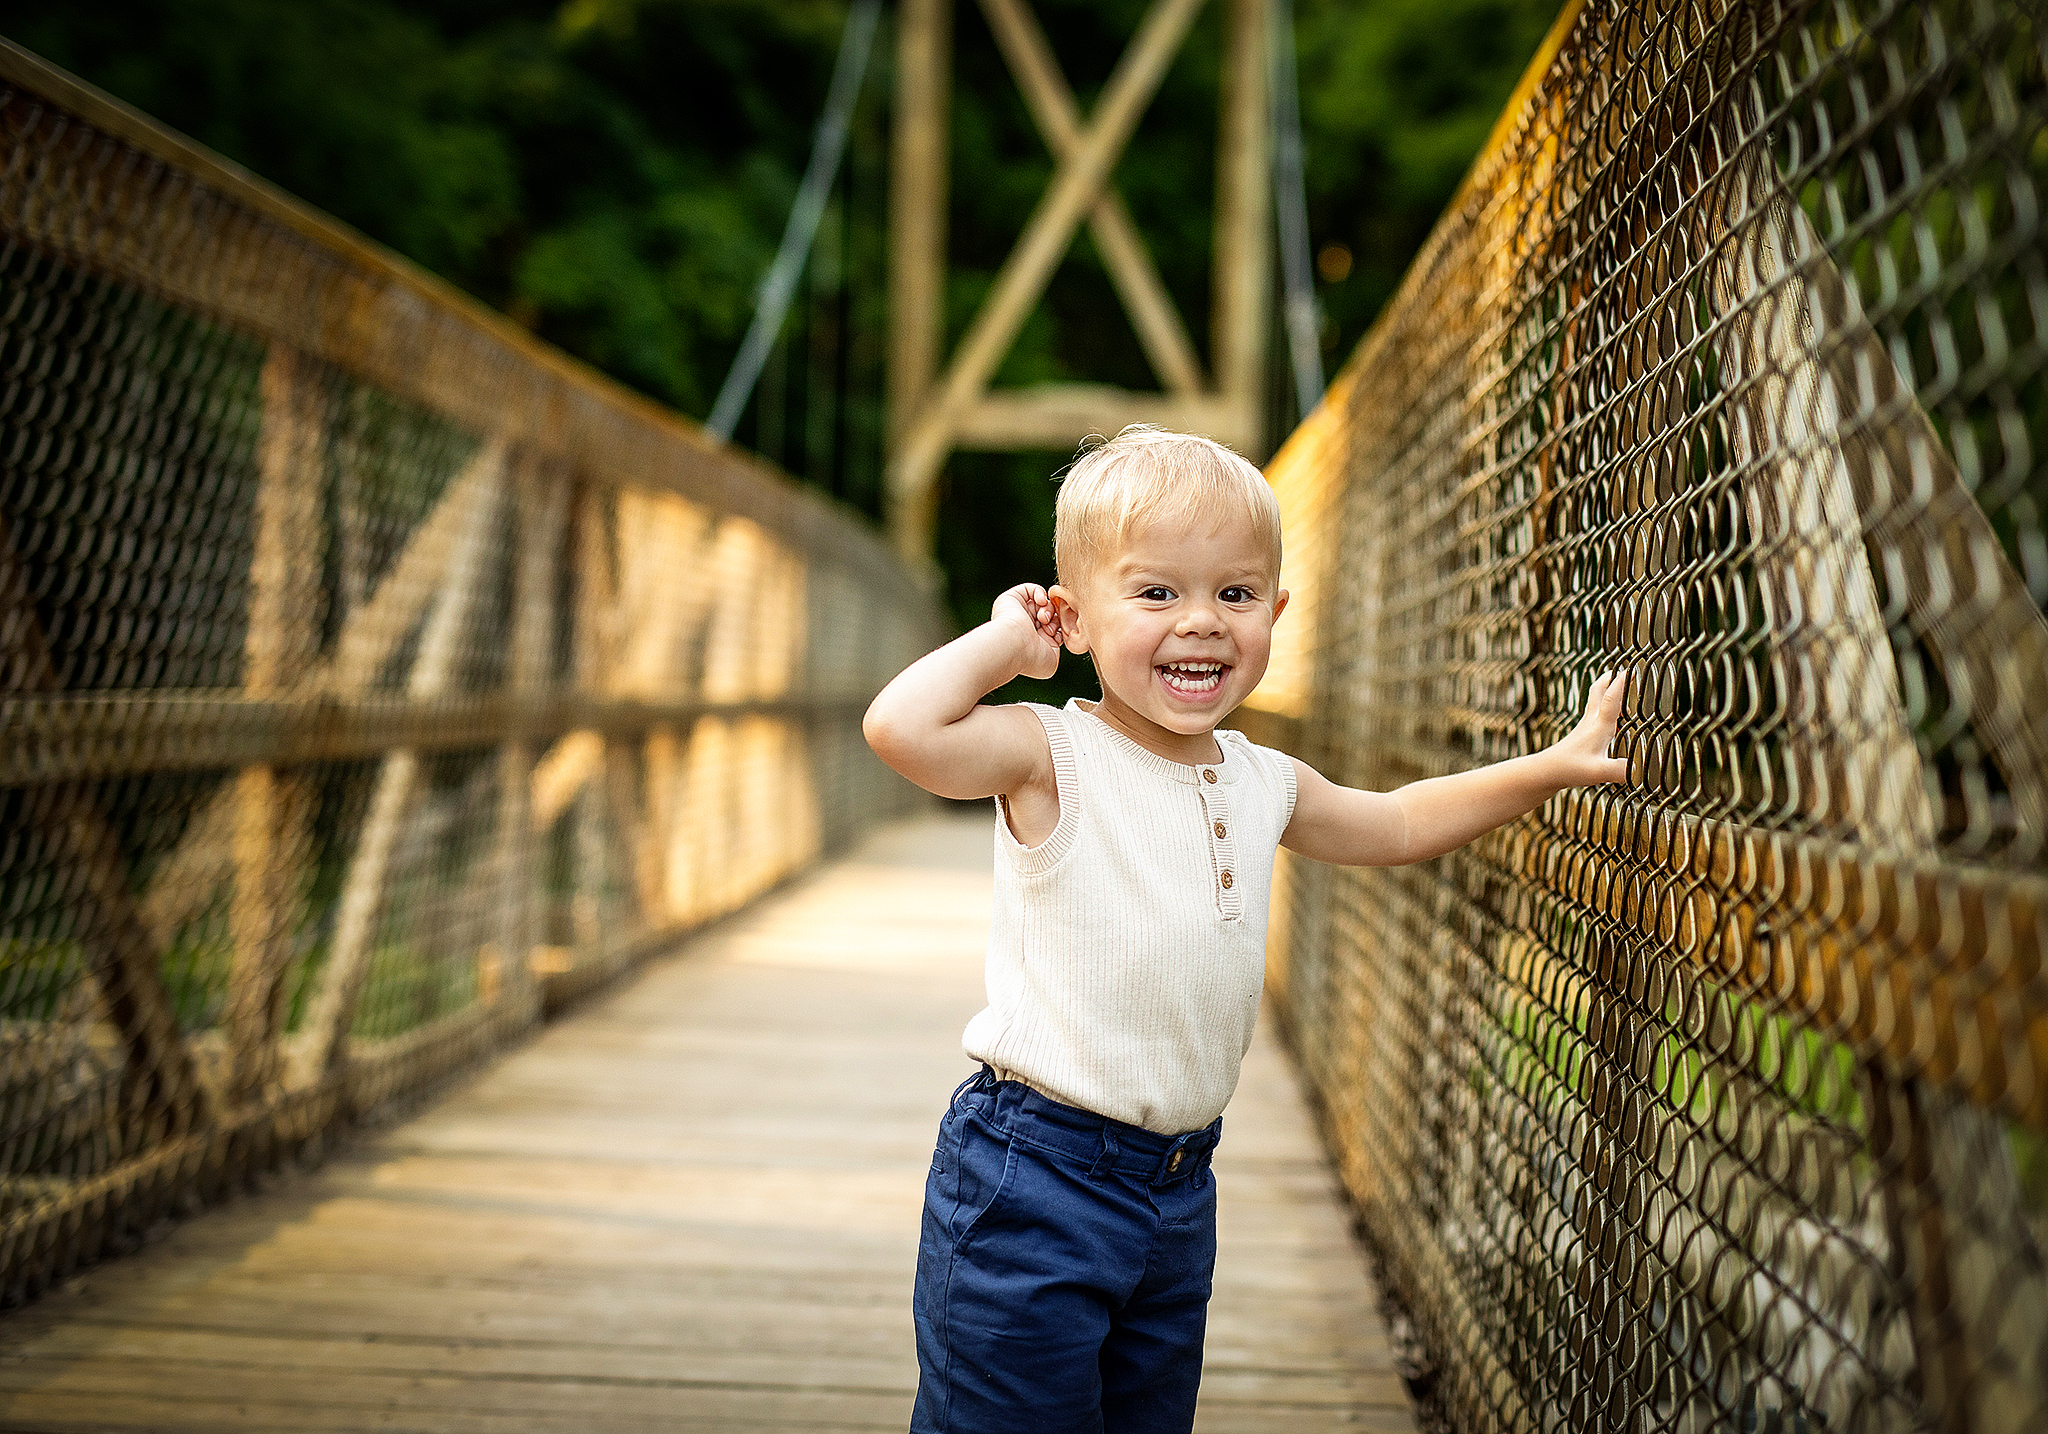 Little boy with ornery grin on his face standing on a bridge